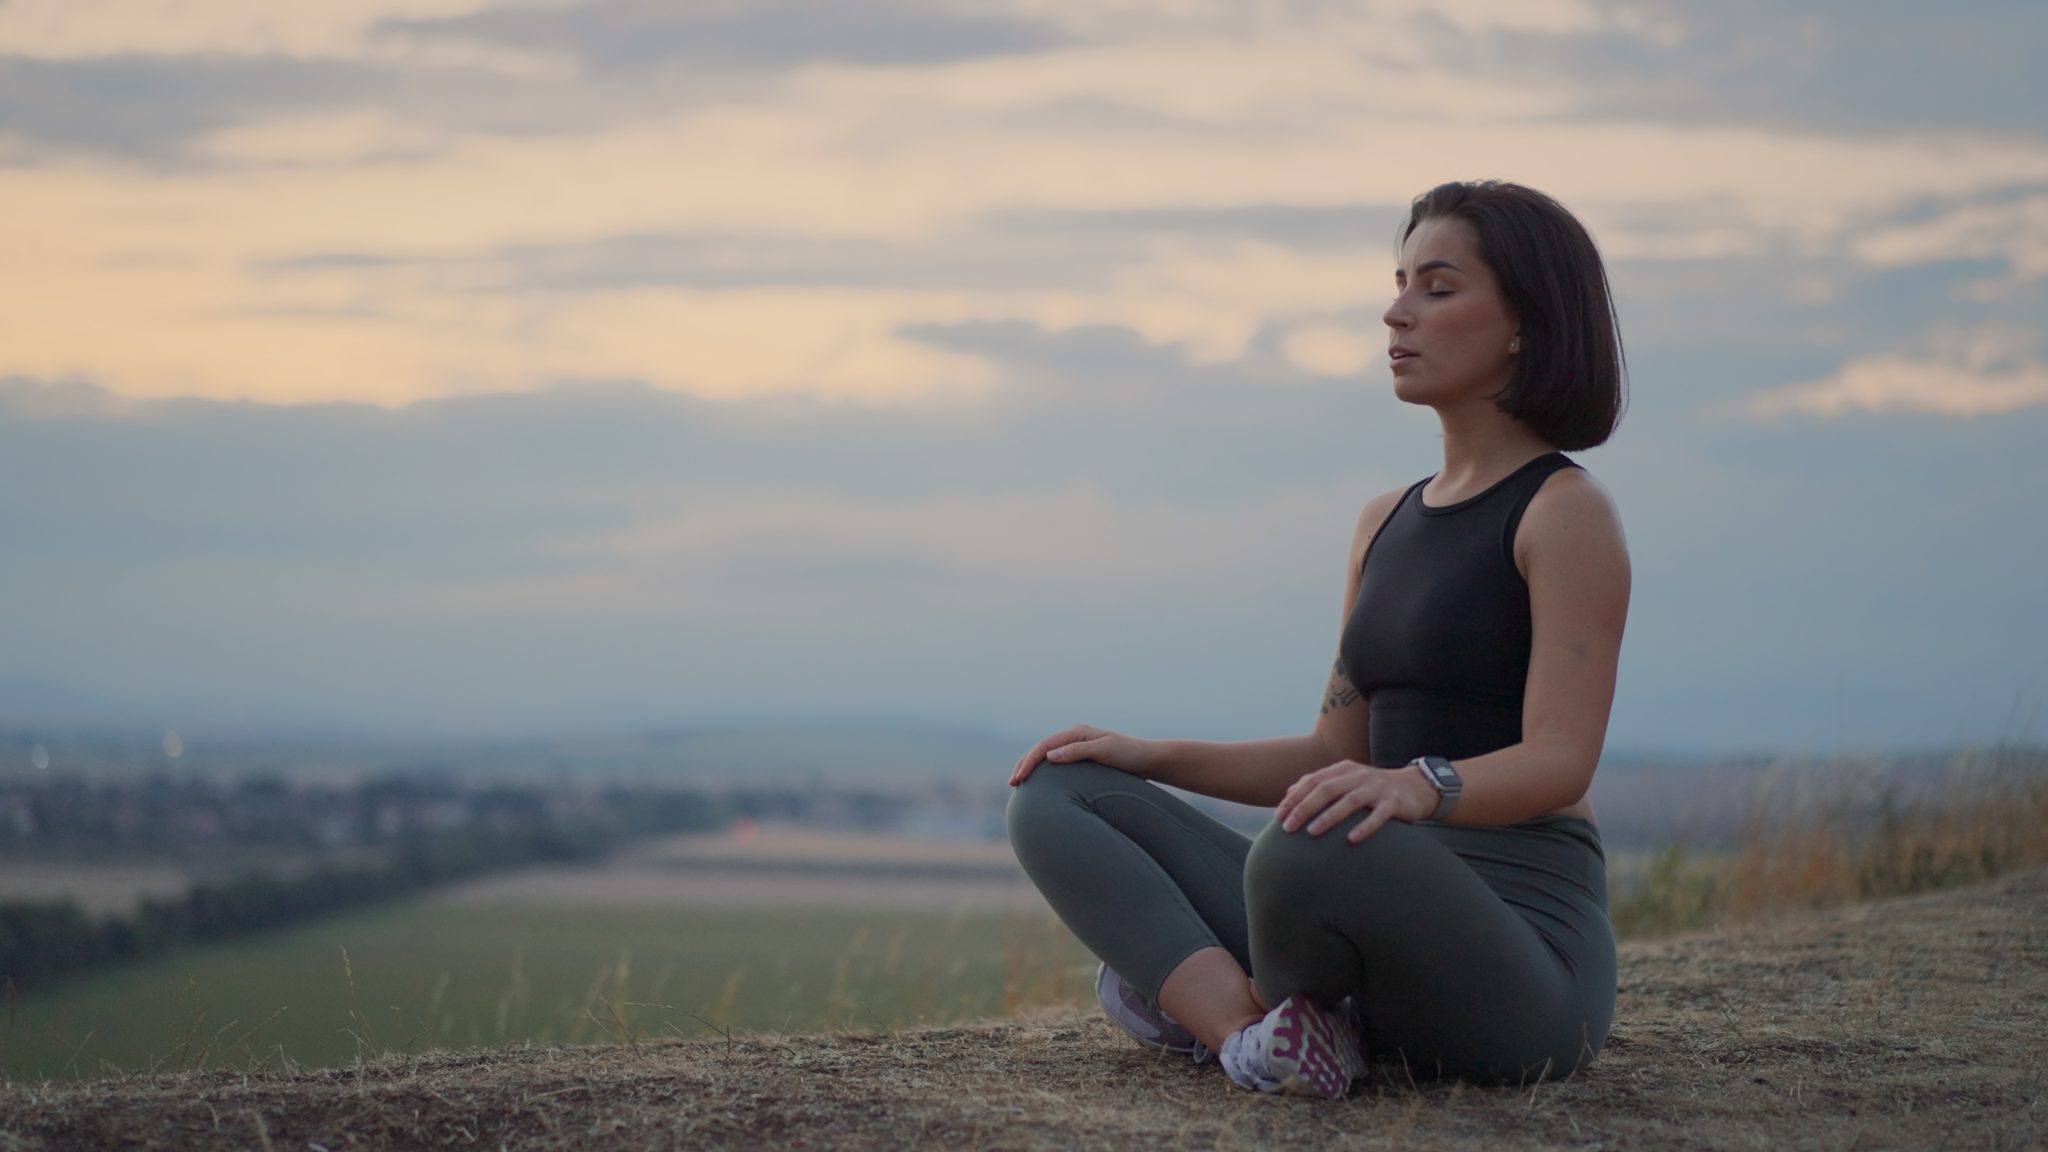 A woman participating in Ashtanga teacher training is meditating outdoors at dusk, sitting cross-legged on a hill with a serene expression and a soft-focus landscape in the background.